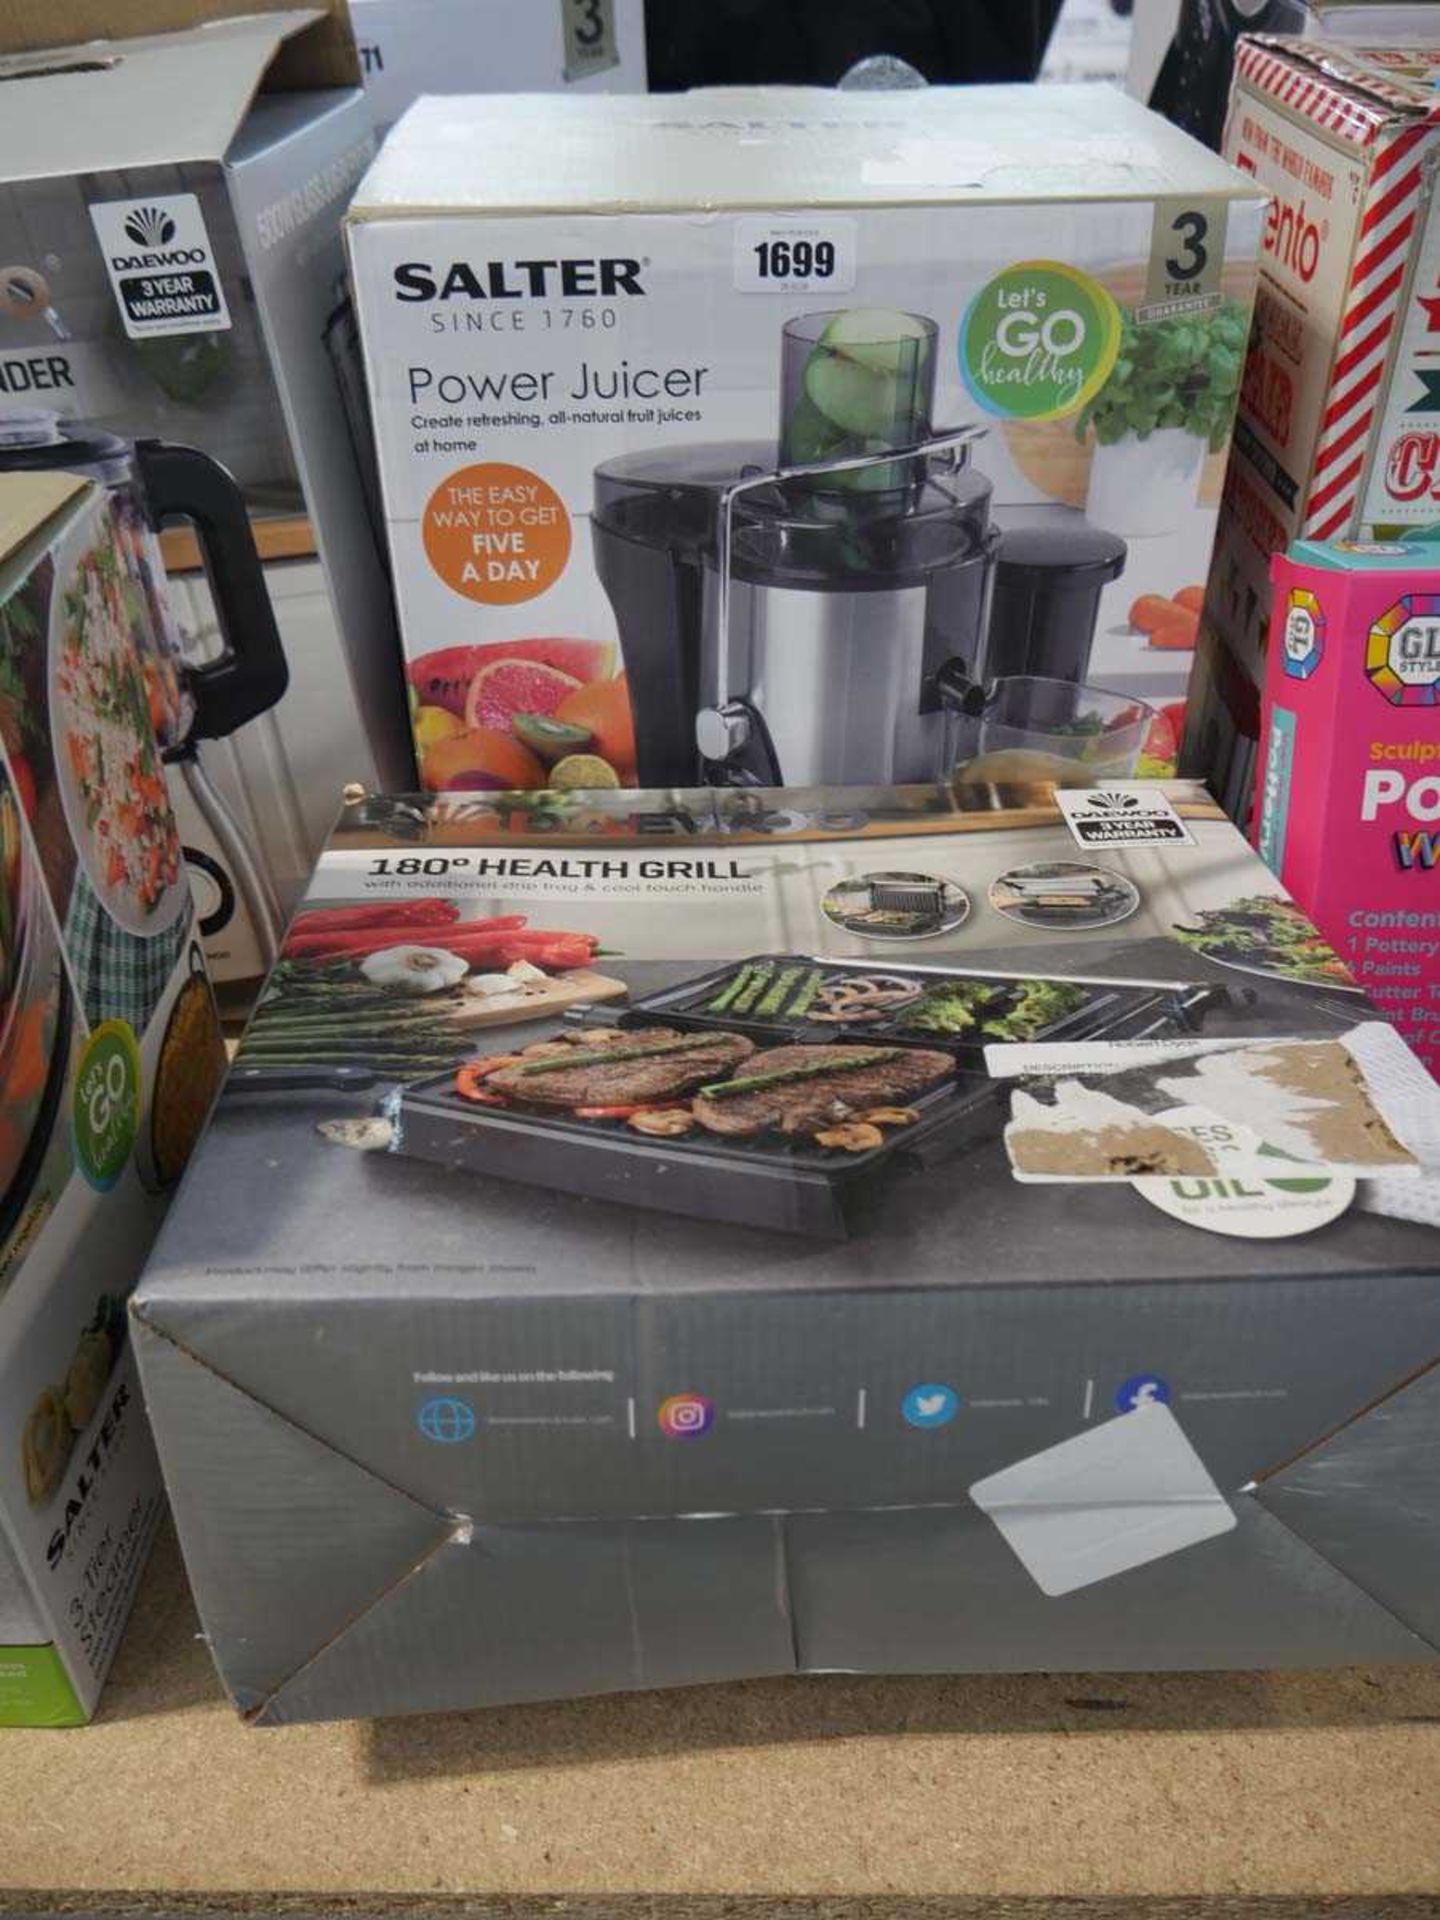 Daewoo 180 Degree Health grill with Salter power juicer